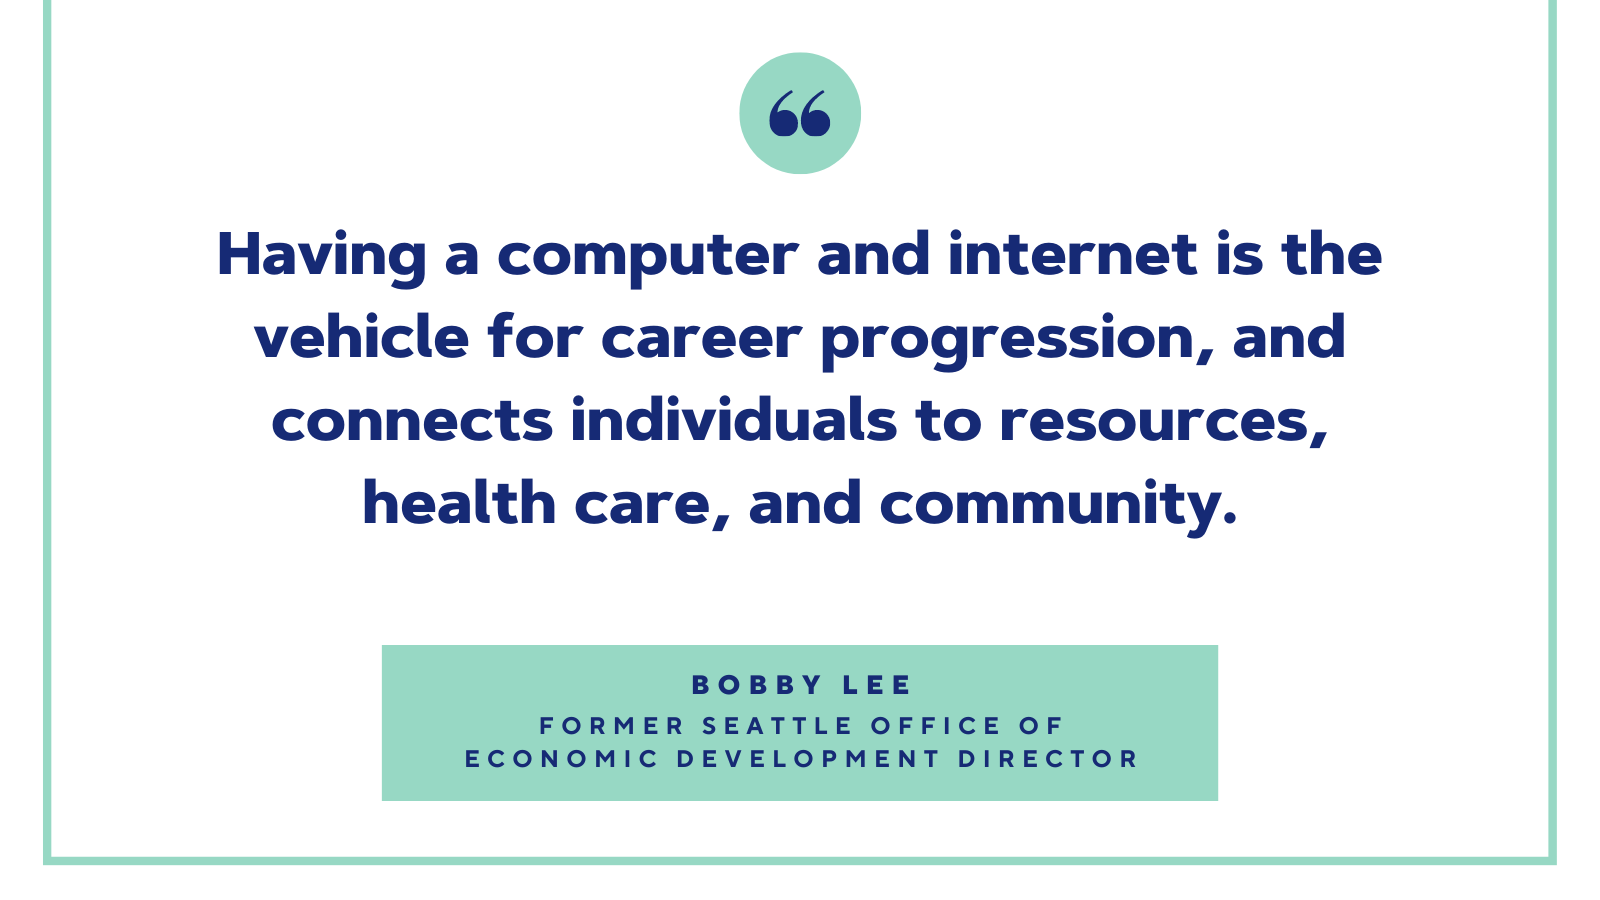 Quote:"Having a computer and internet is the vehicle for career progression, and connects individuals to resources, health care, and community."